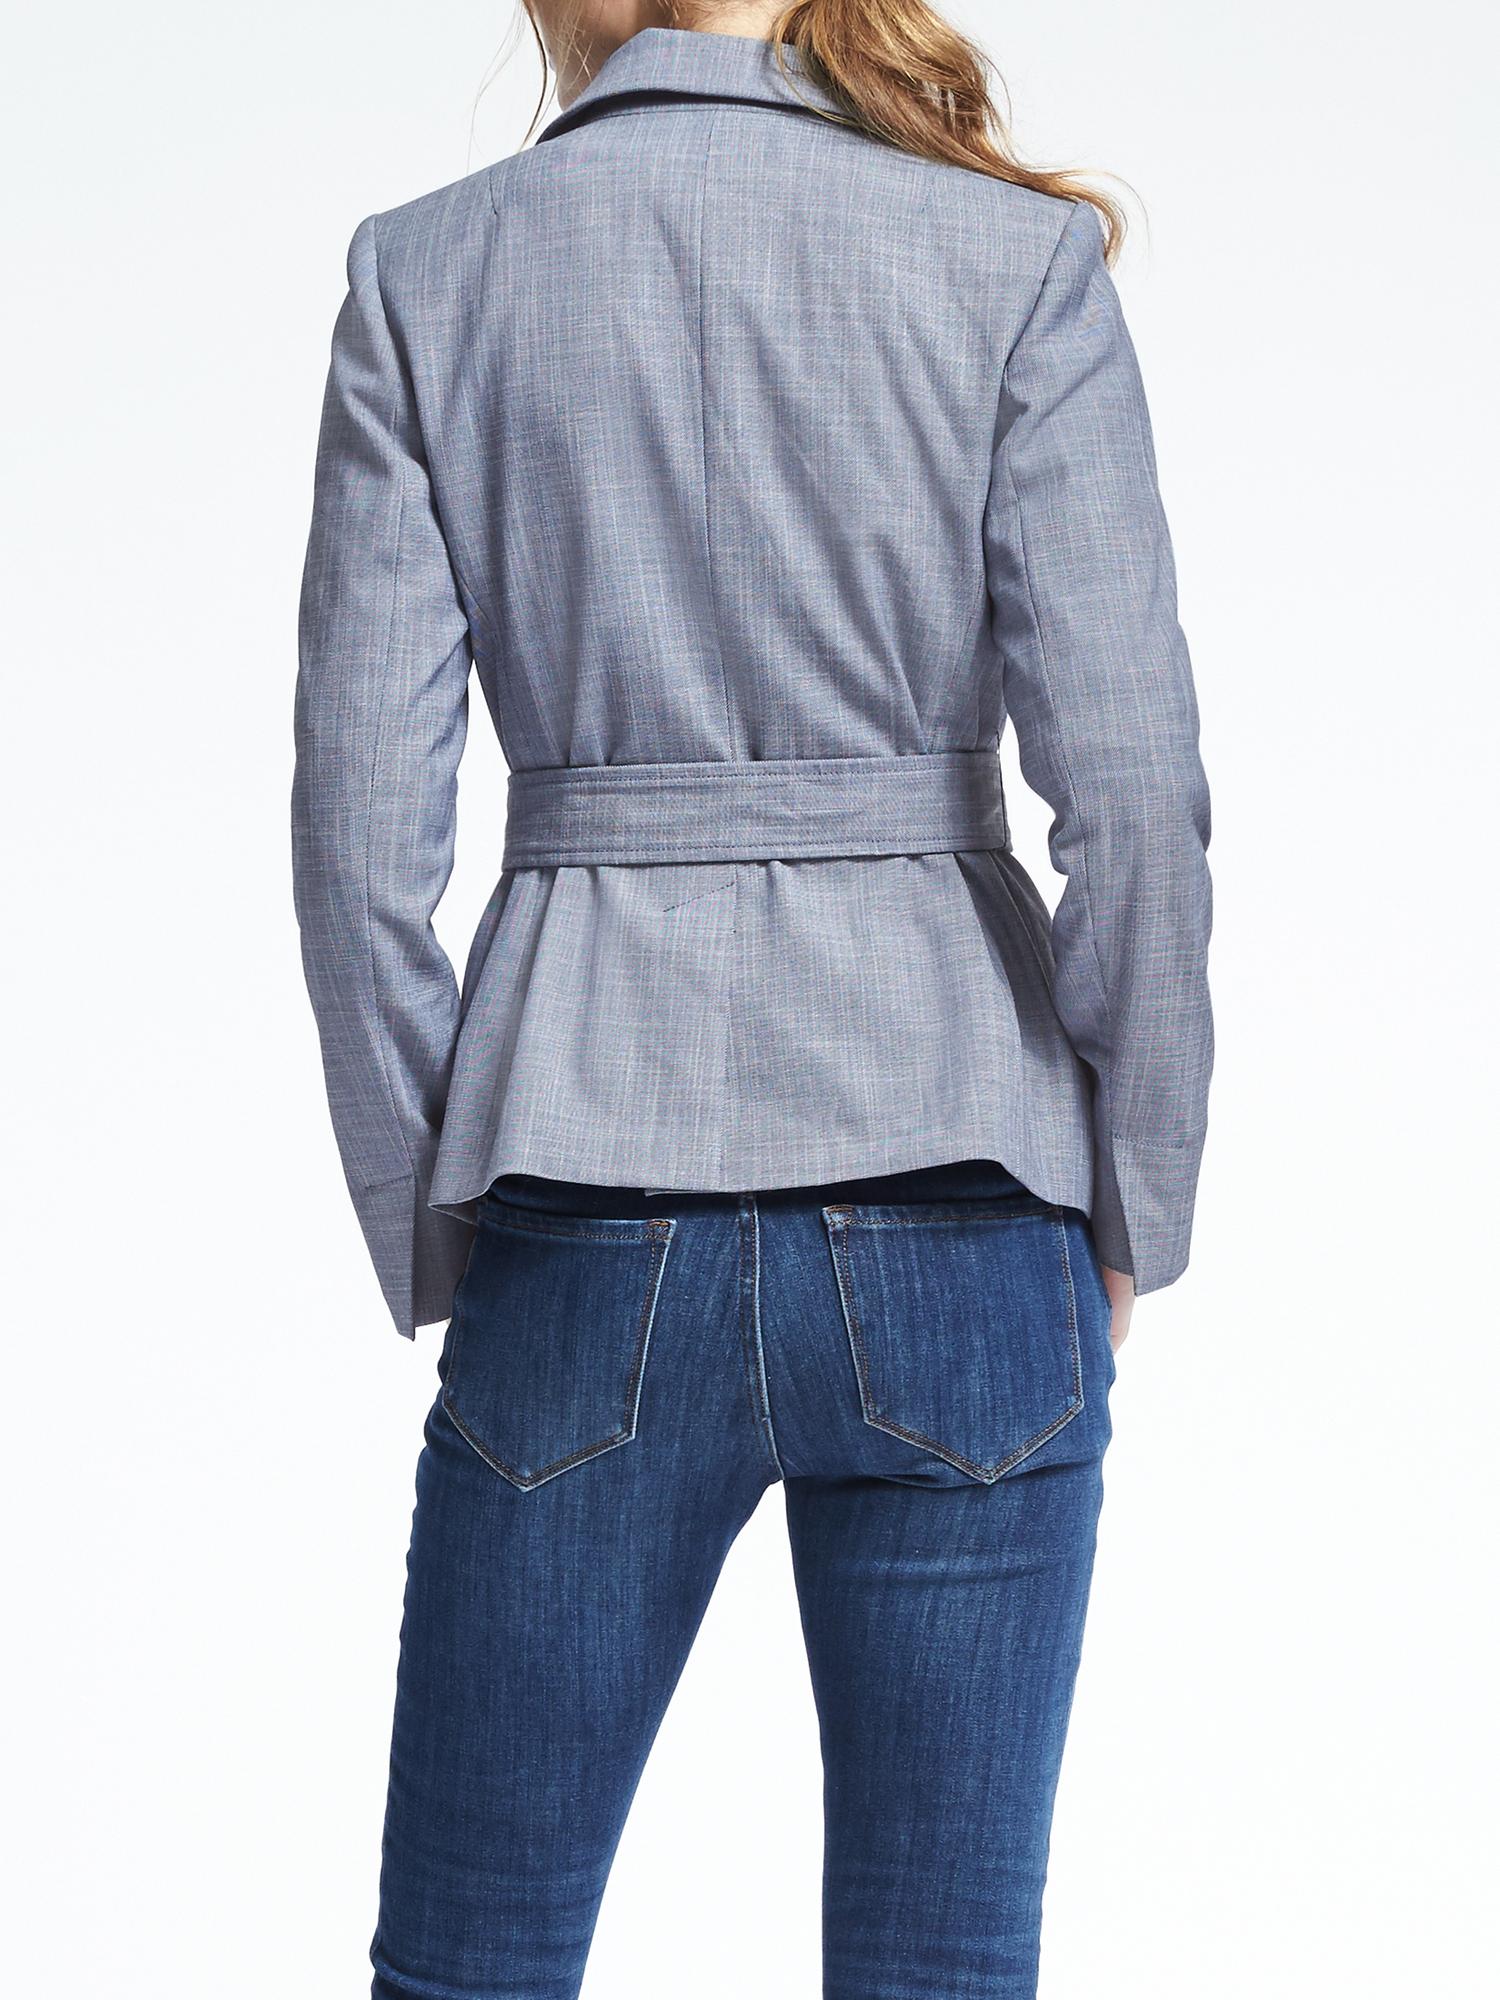 Chambray Belted Wrap Jacket